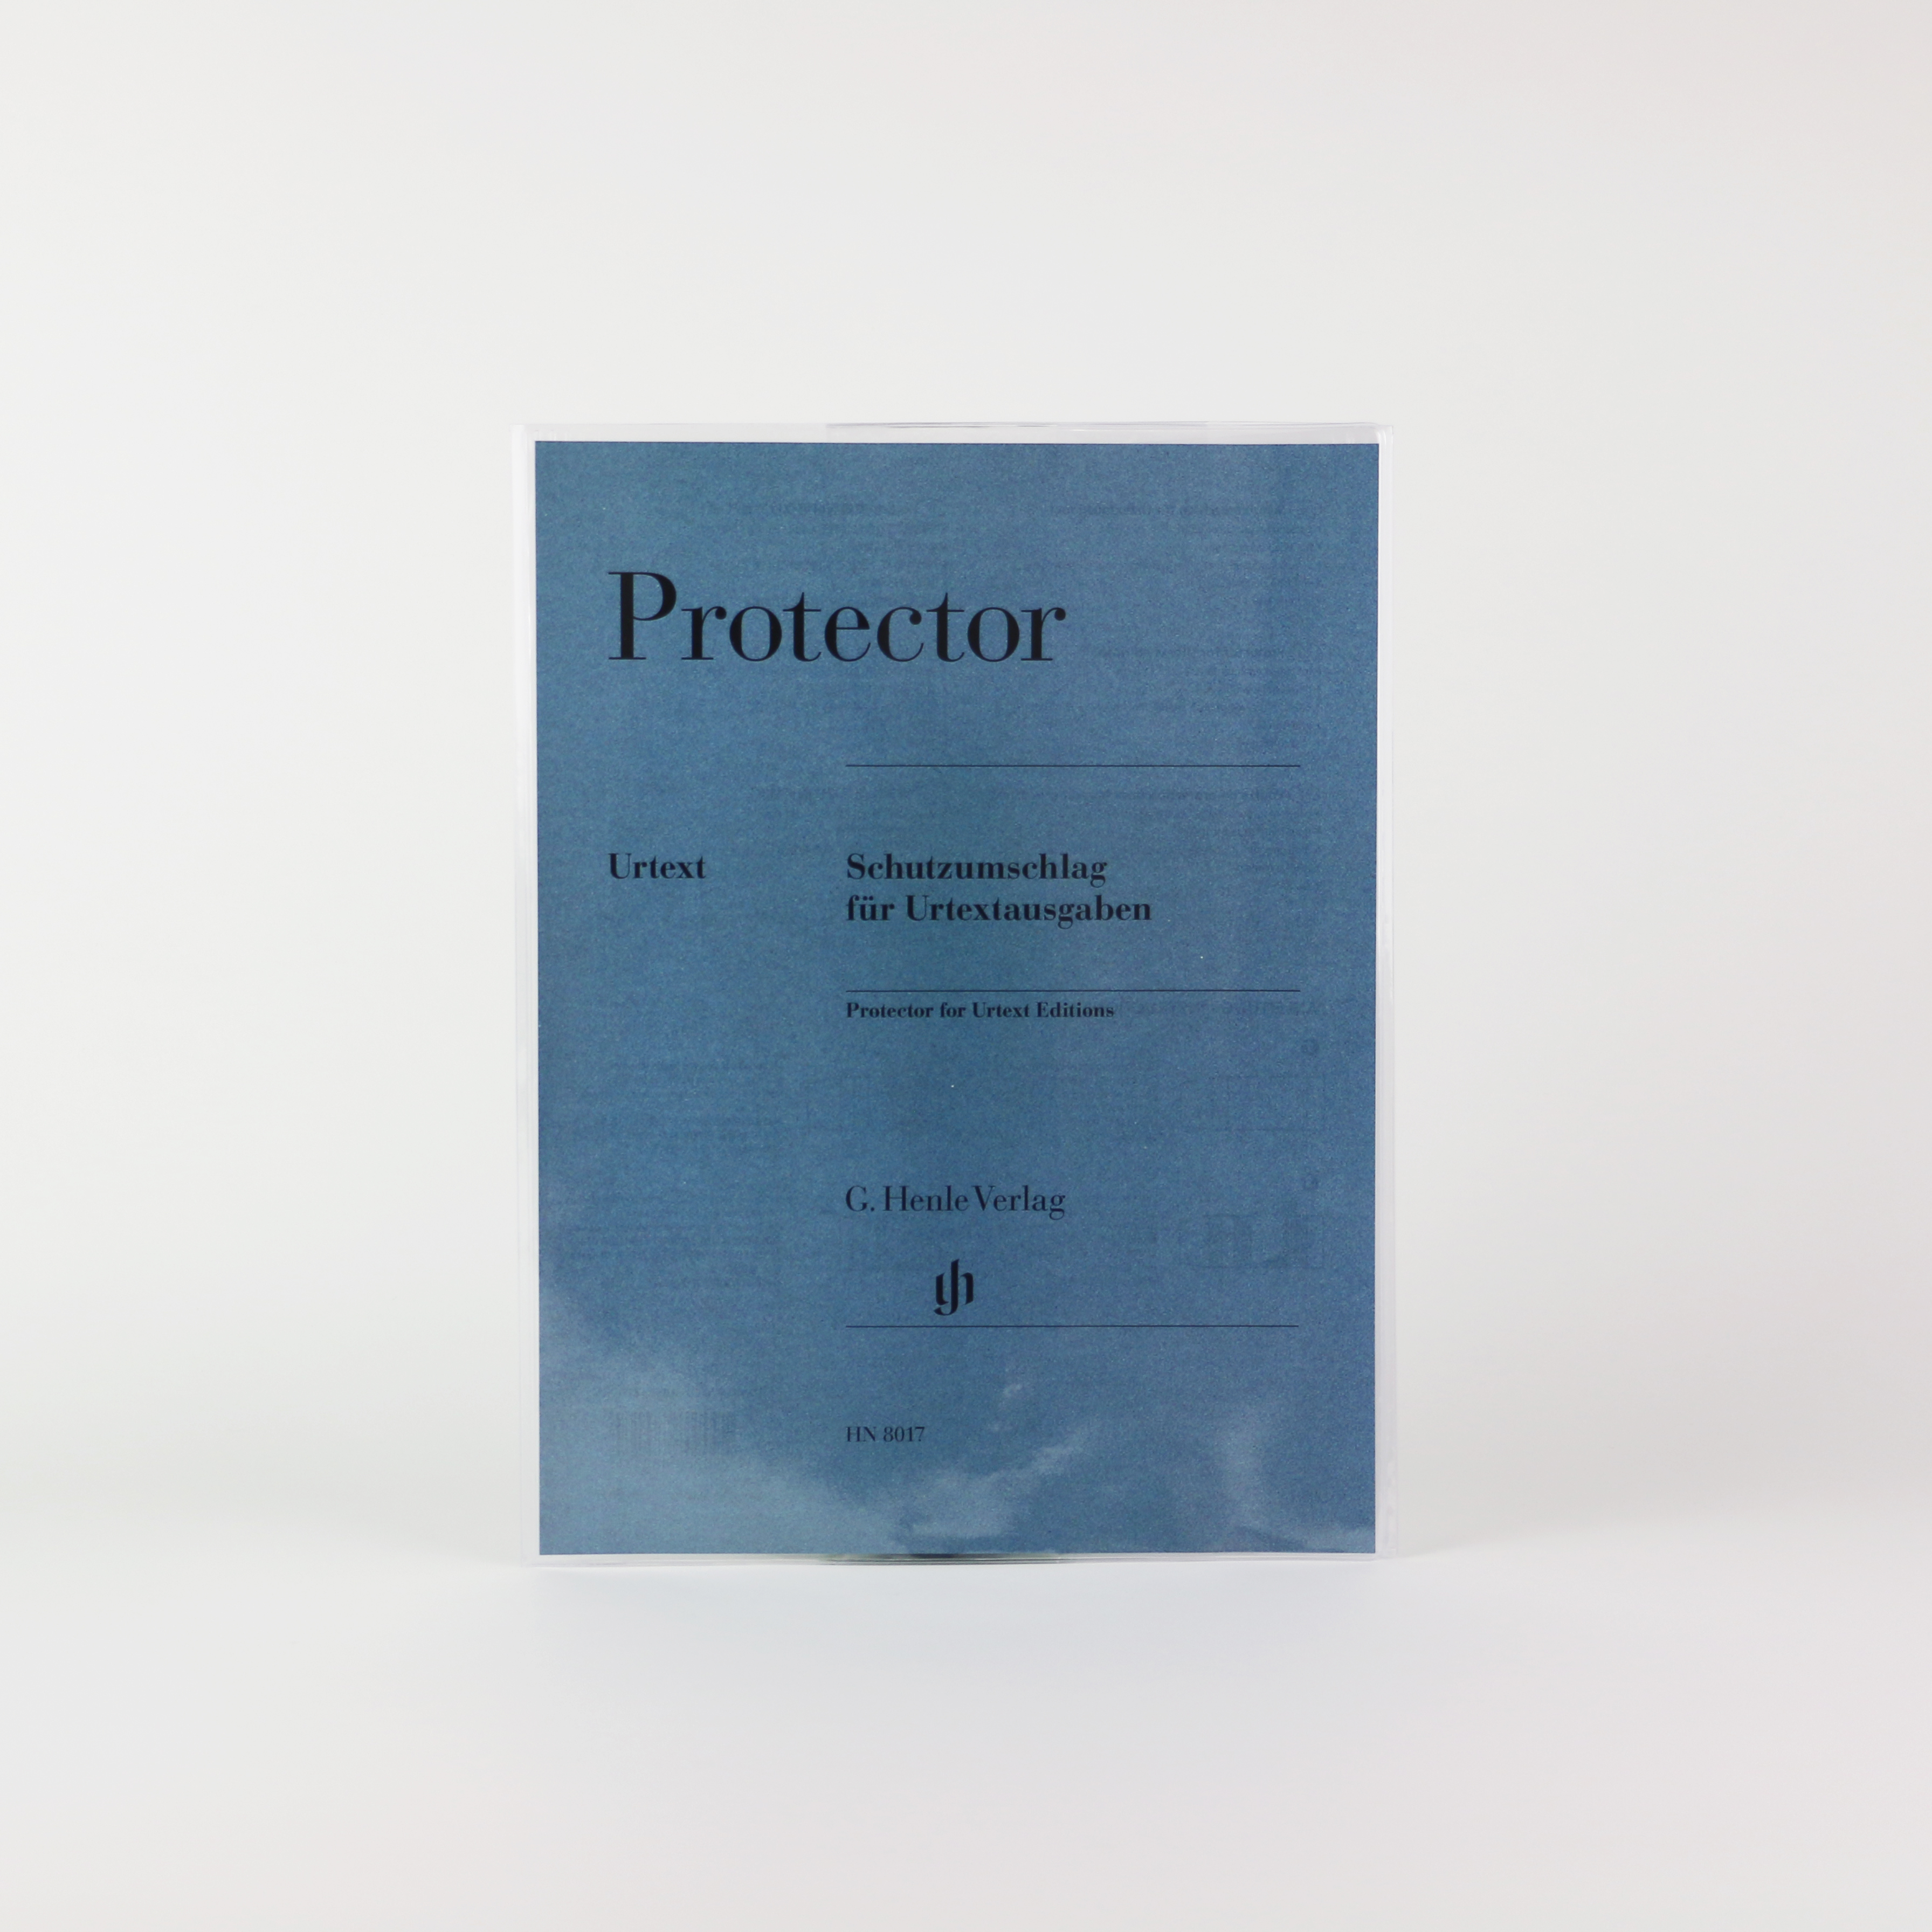 Protective cover for Urtext editions